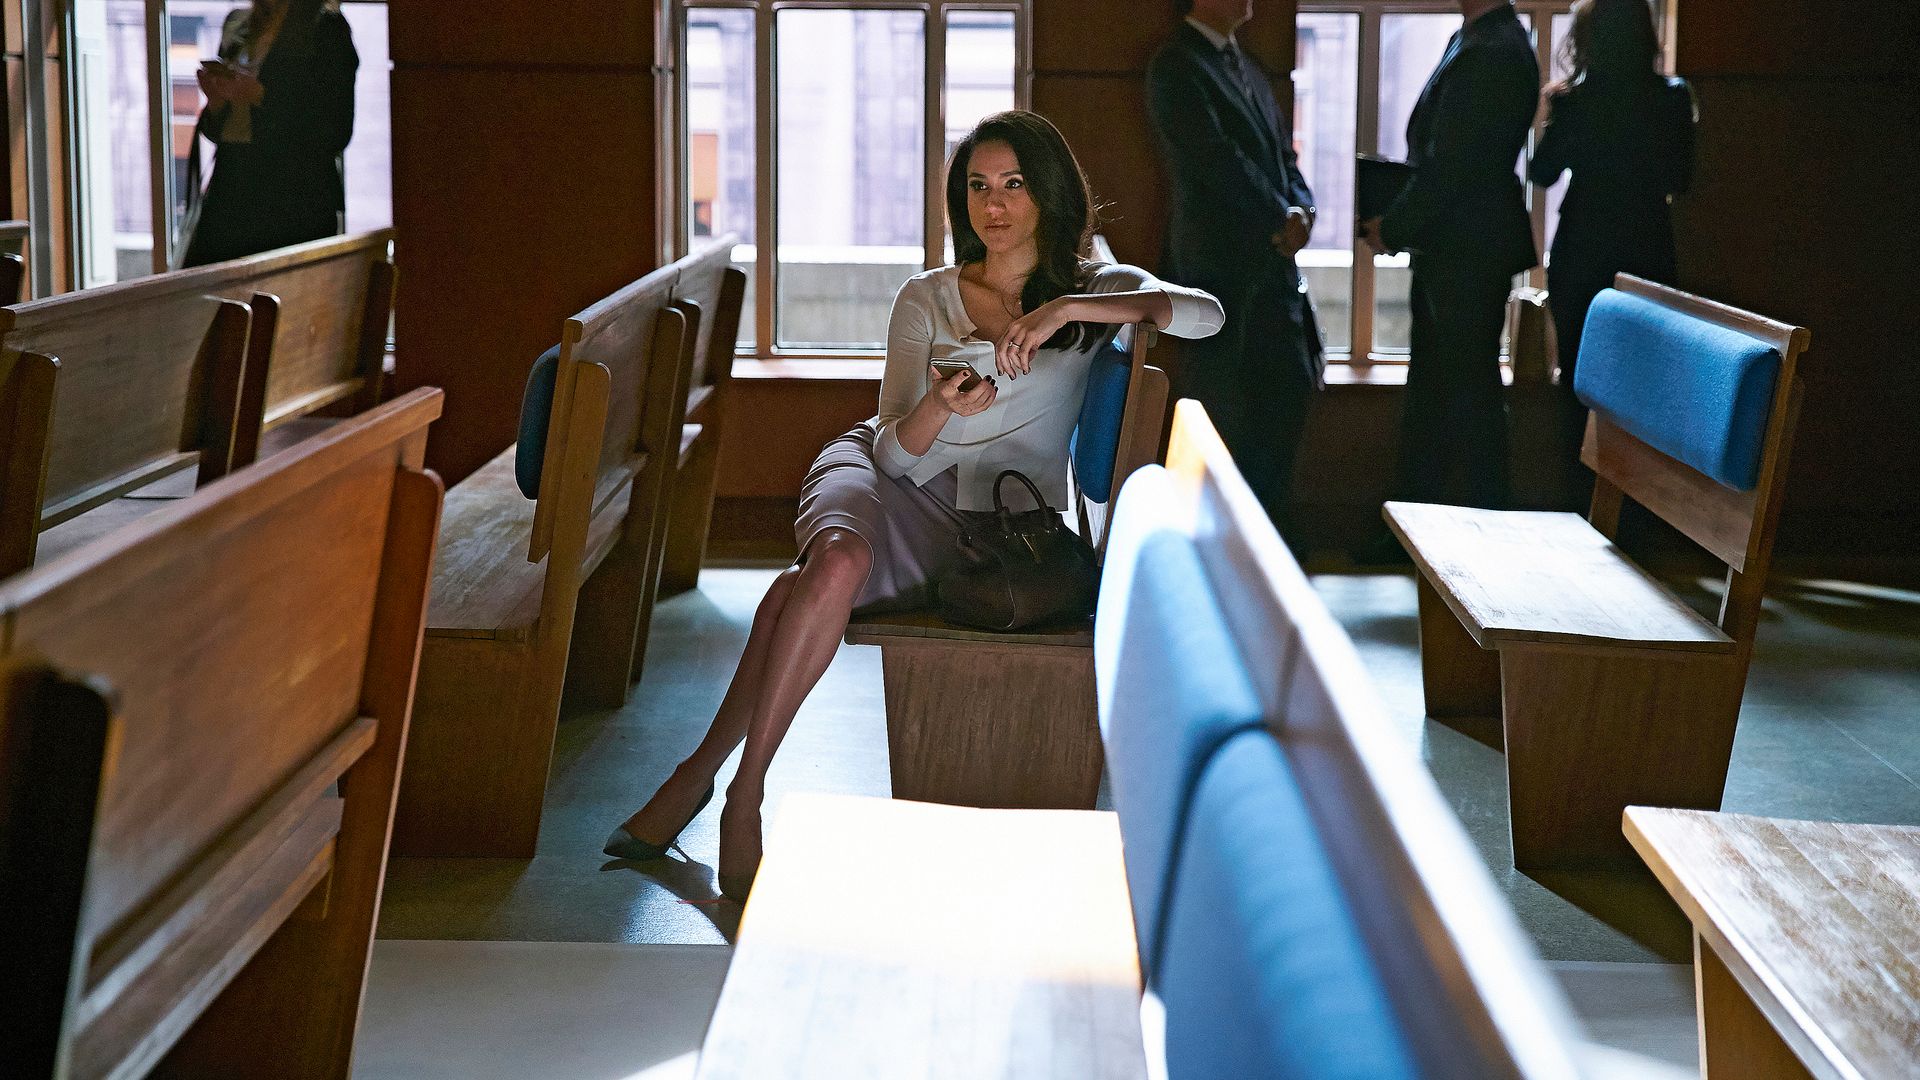 SUITS -- "Tick Tock" Episode 515 -- Pictured: Meghan Markle as Rachel Zane -- (Photo by: Shane Mahood/USA Network/NBCU Photo Bank/NBCUniversal via Getty Images)